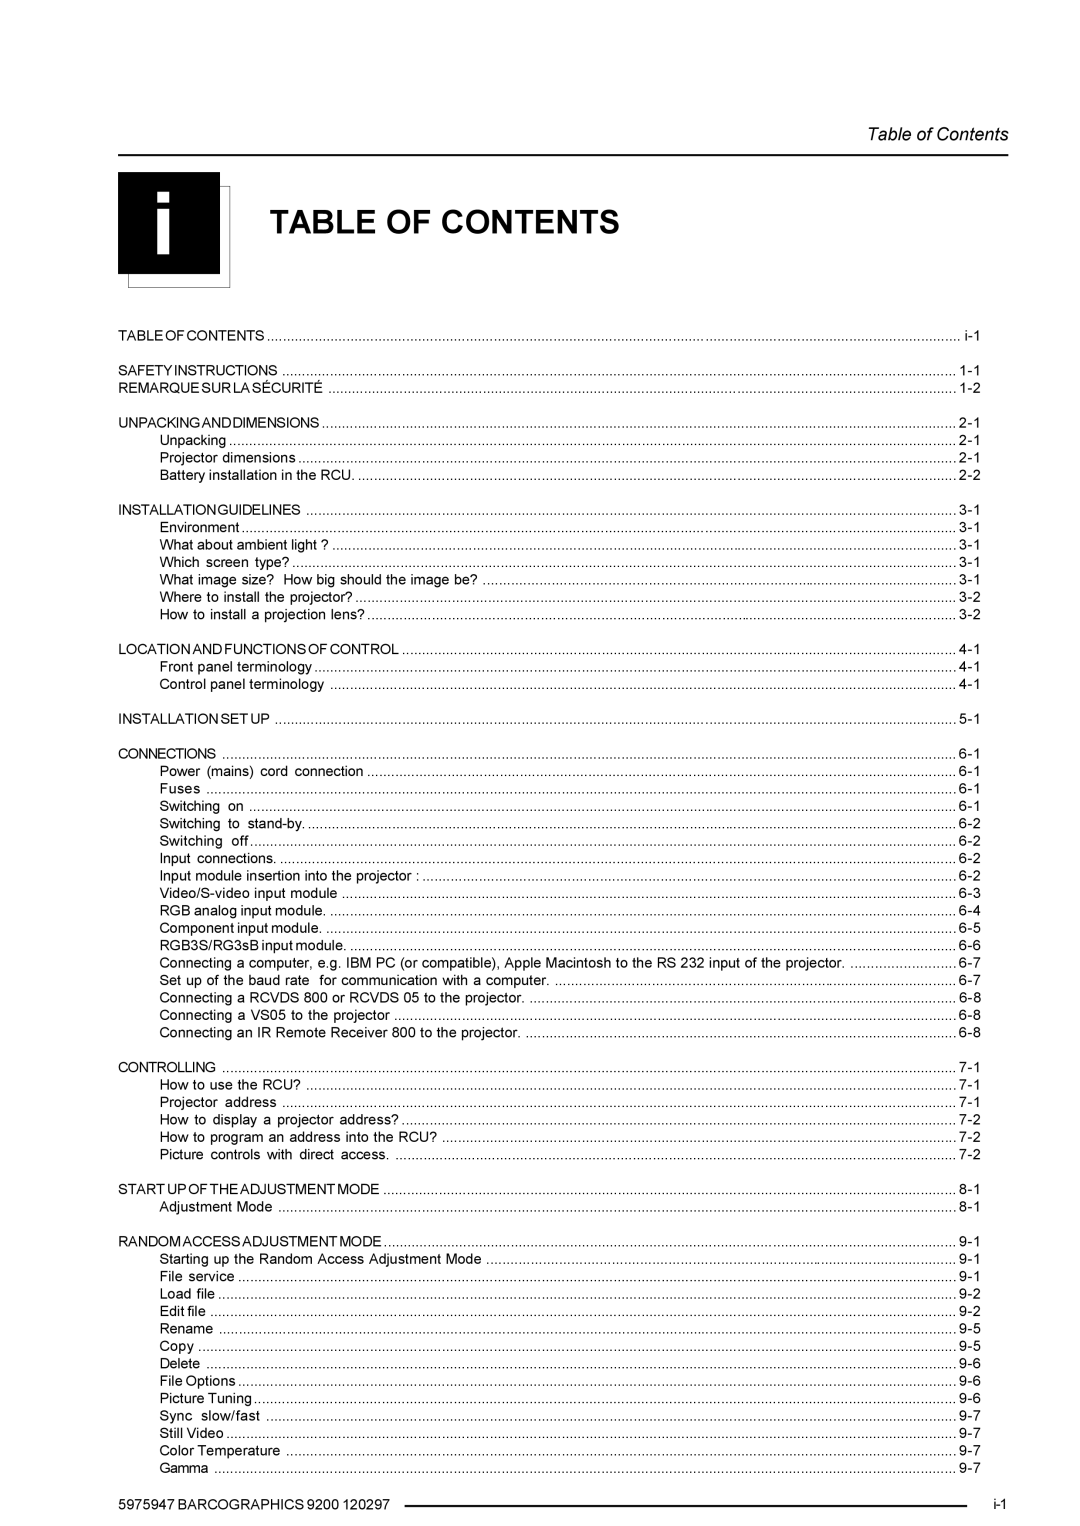 Barco 9200 owner manual i TABLE OF CONTENTS, Table of Contents 